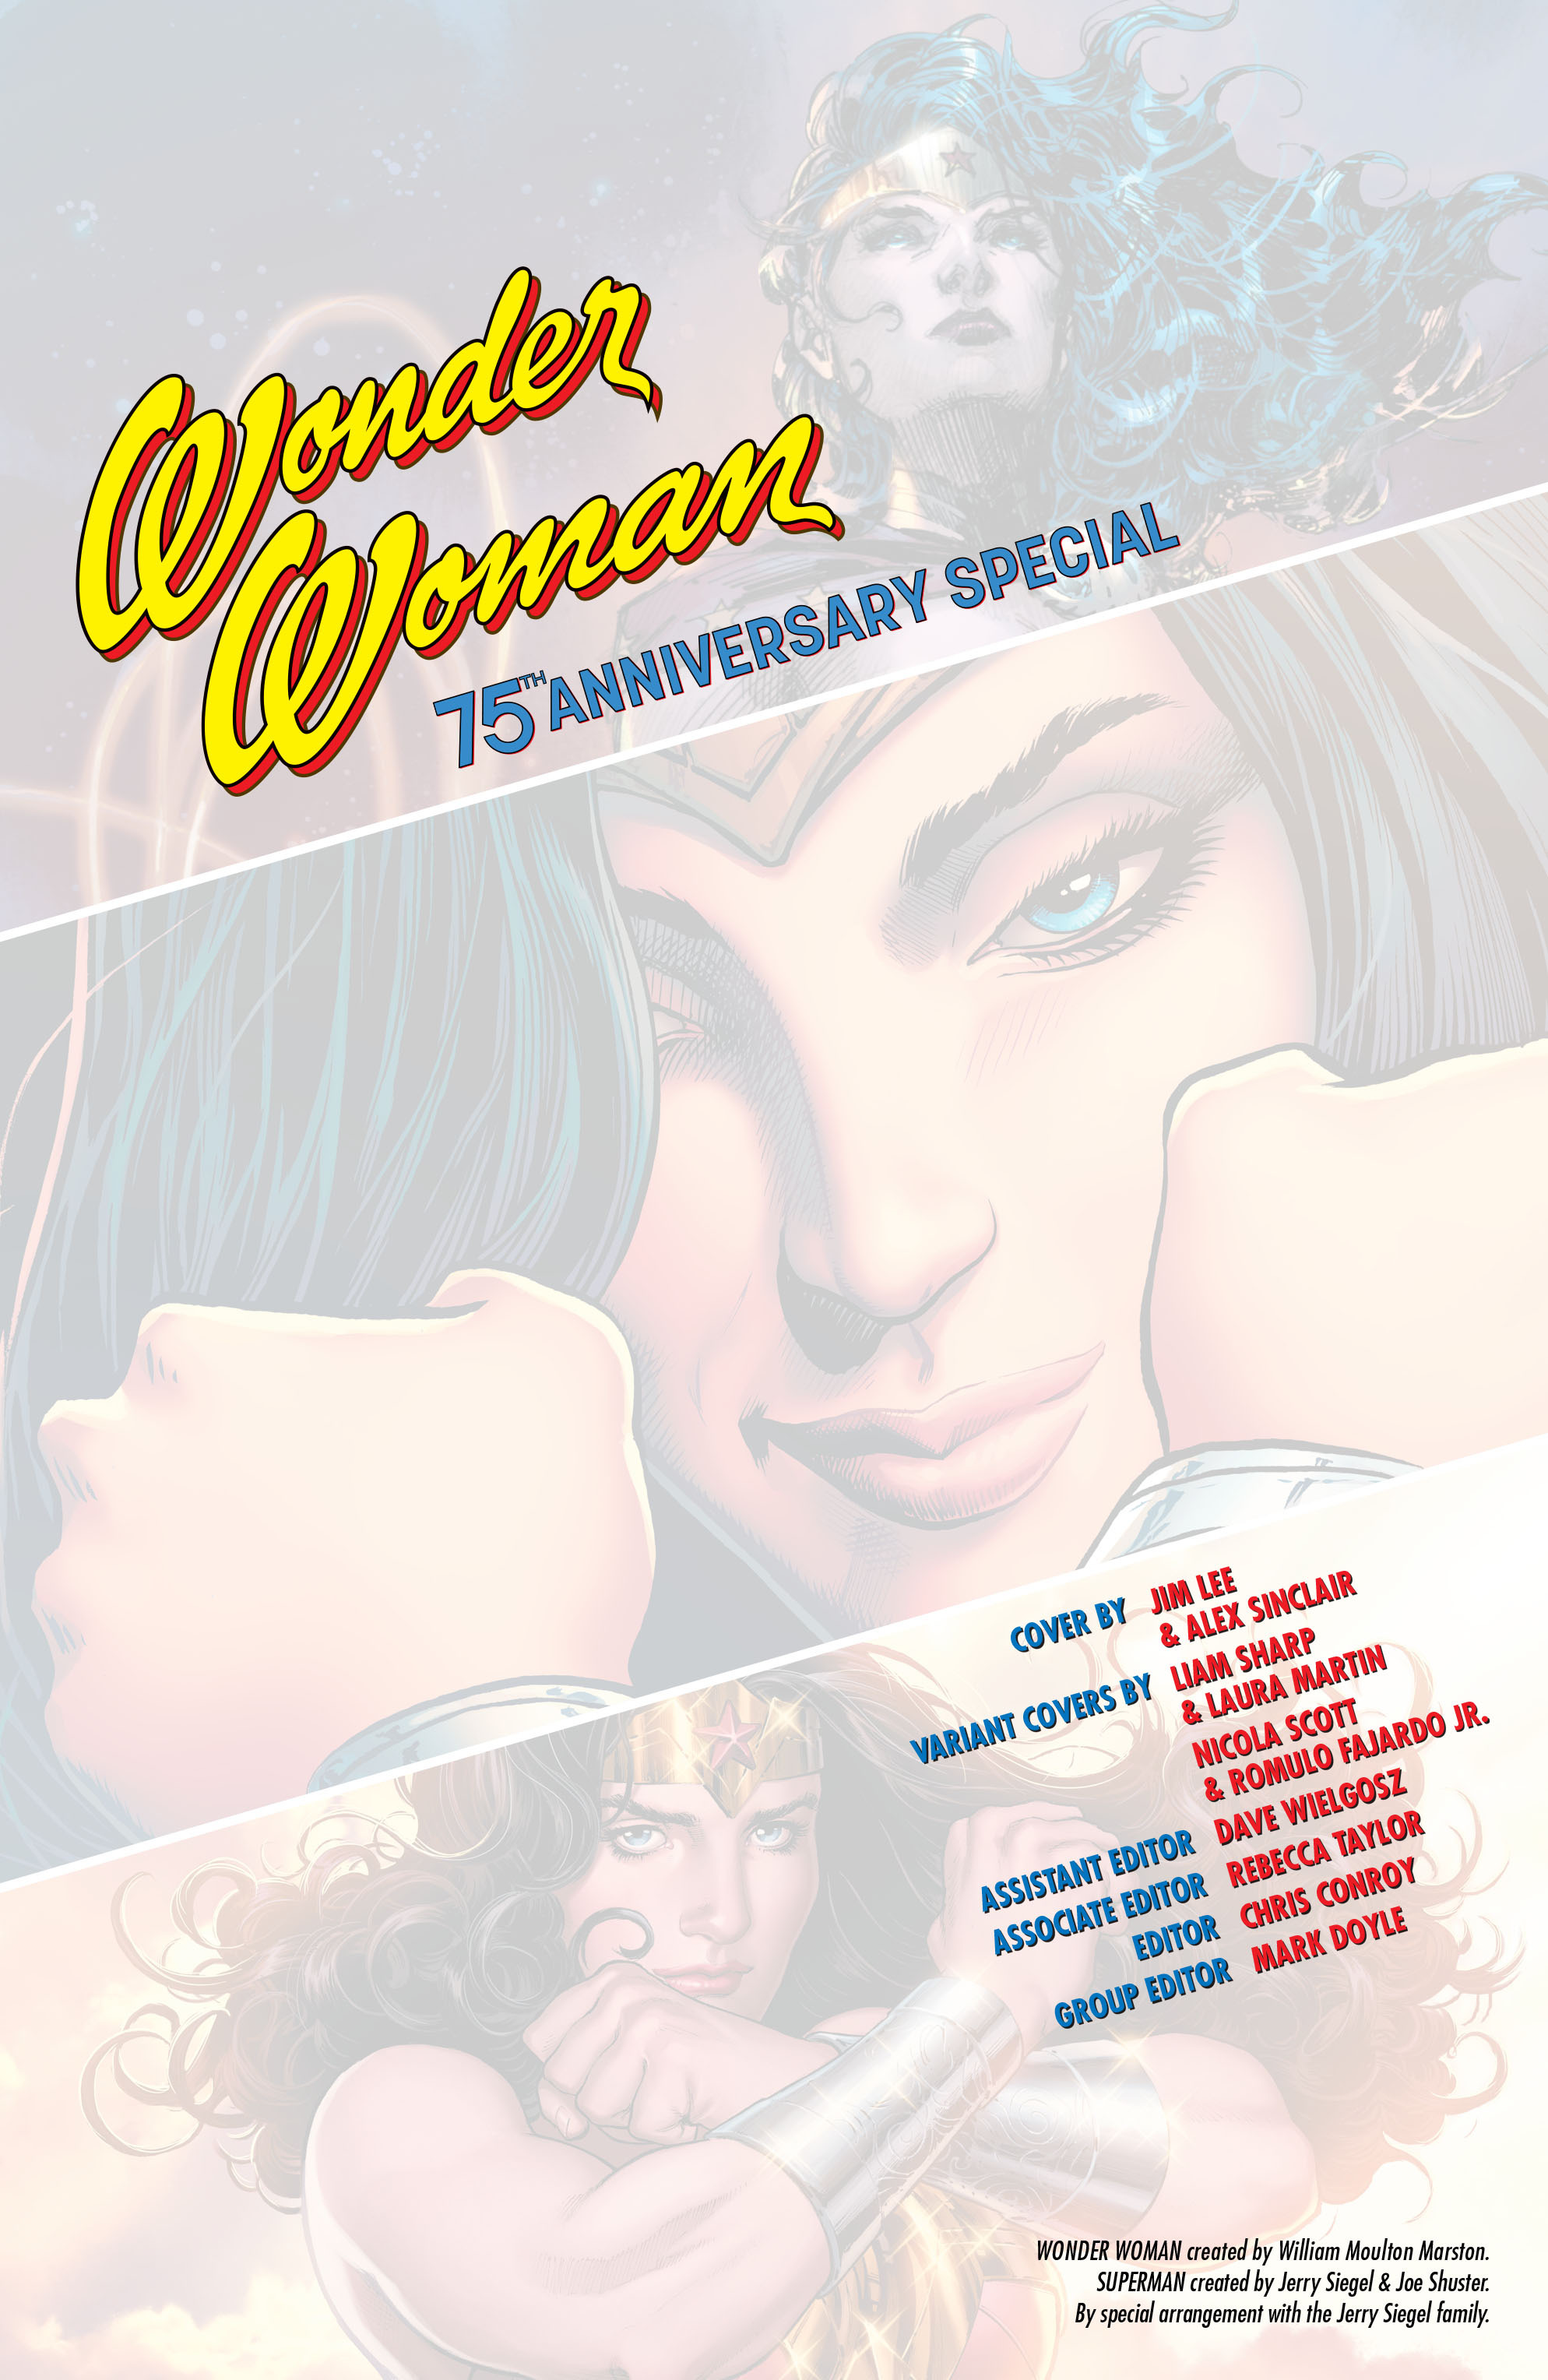 Read online Wonder Woman 75th Anniversary Special comic -  Issue # Full - 4